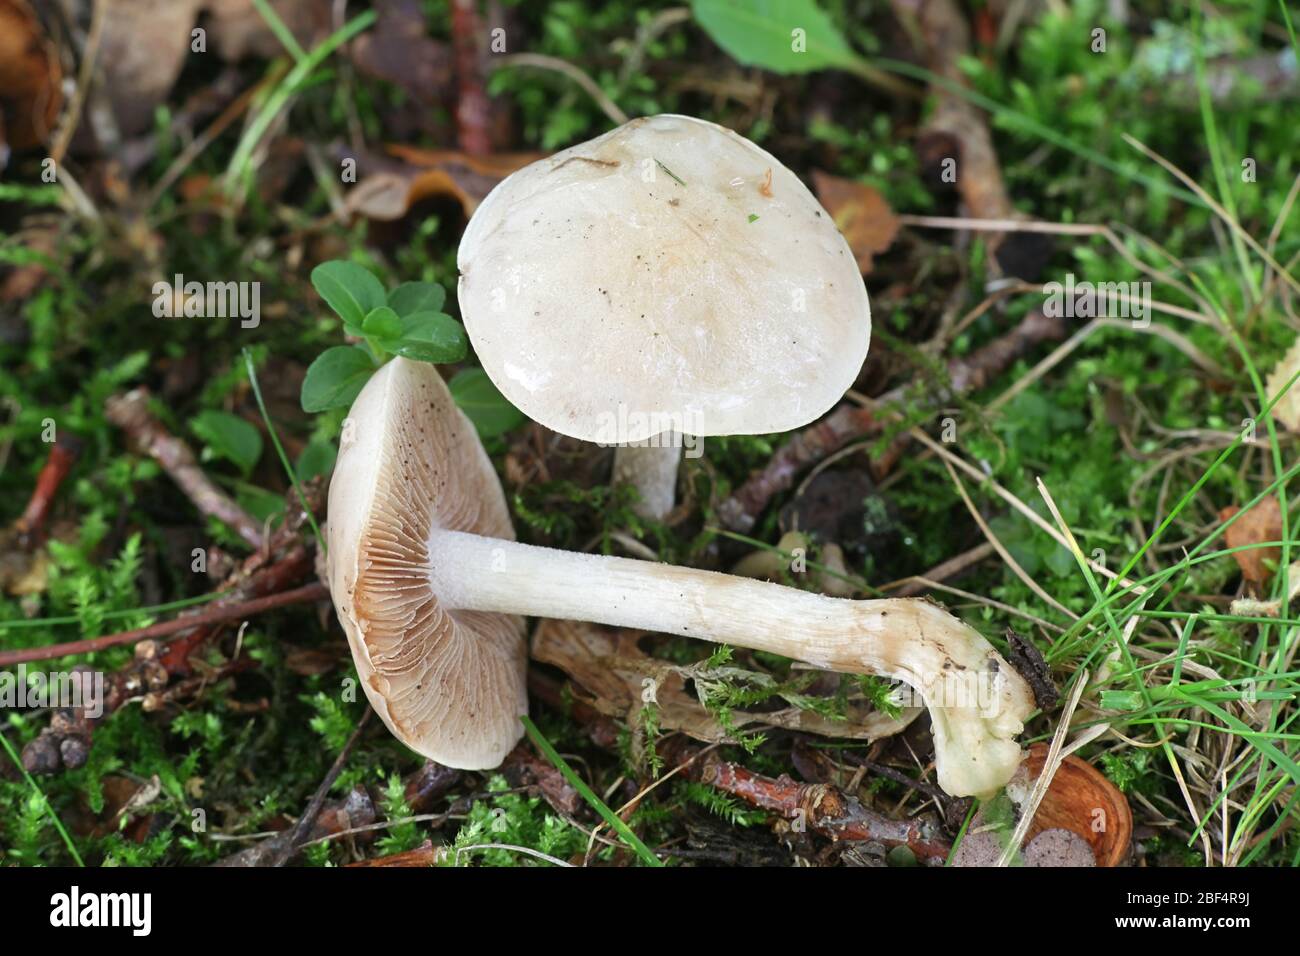 Hebeloma crustuliniforme, known as poison pie or poisonpie, poisonous mushrooms from Finland Stock Photo